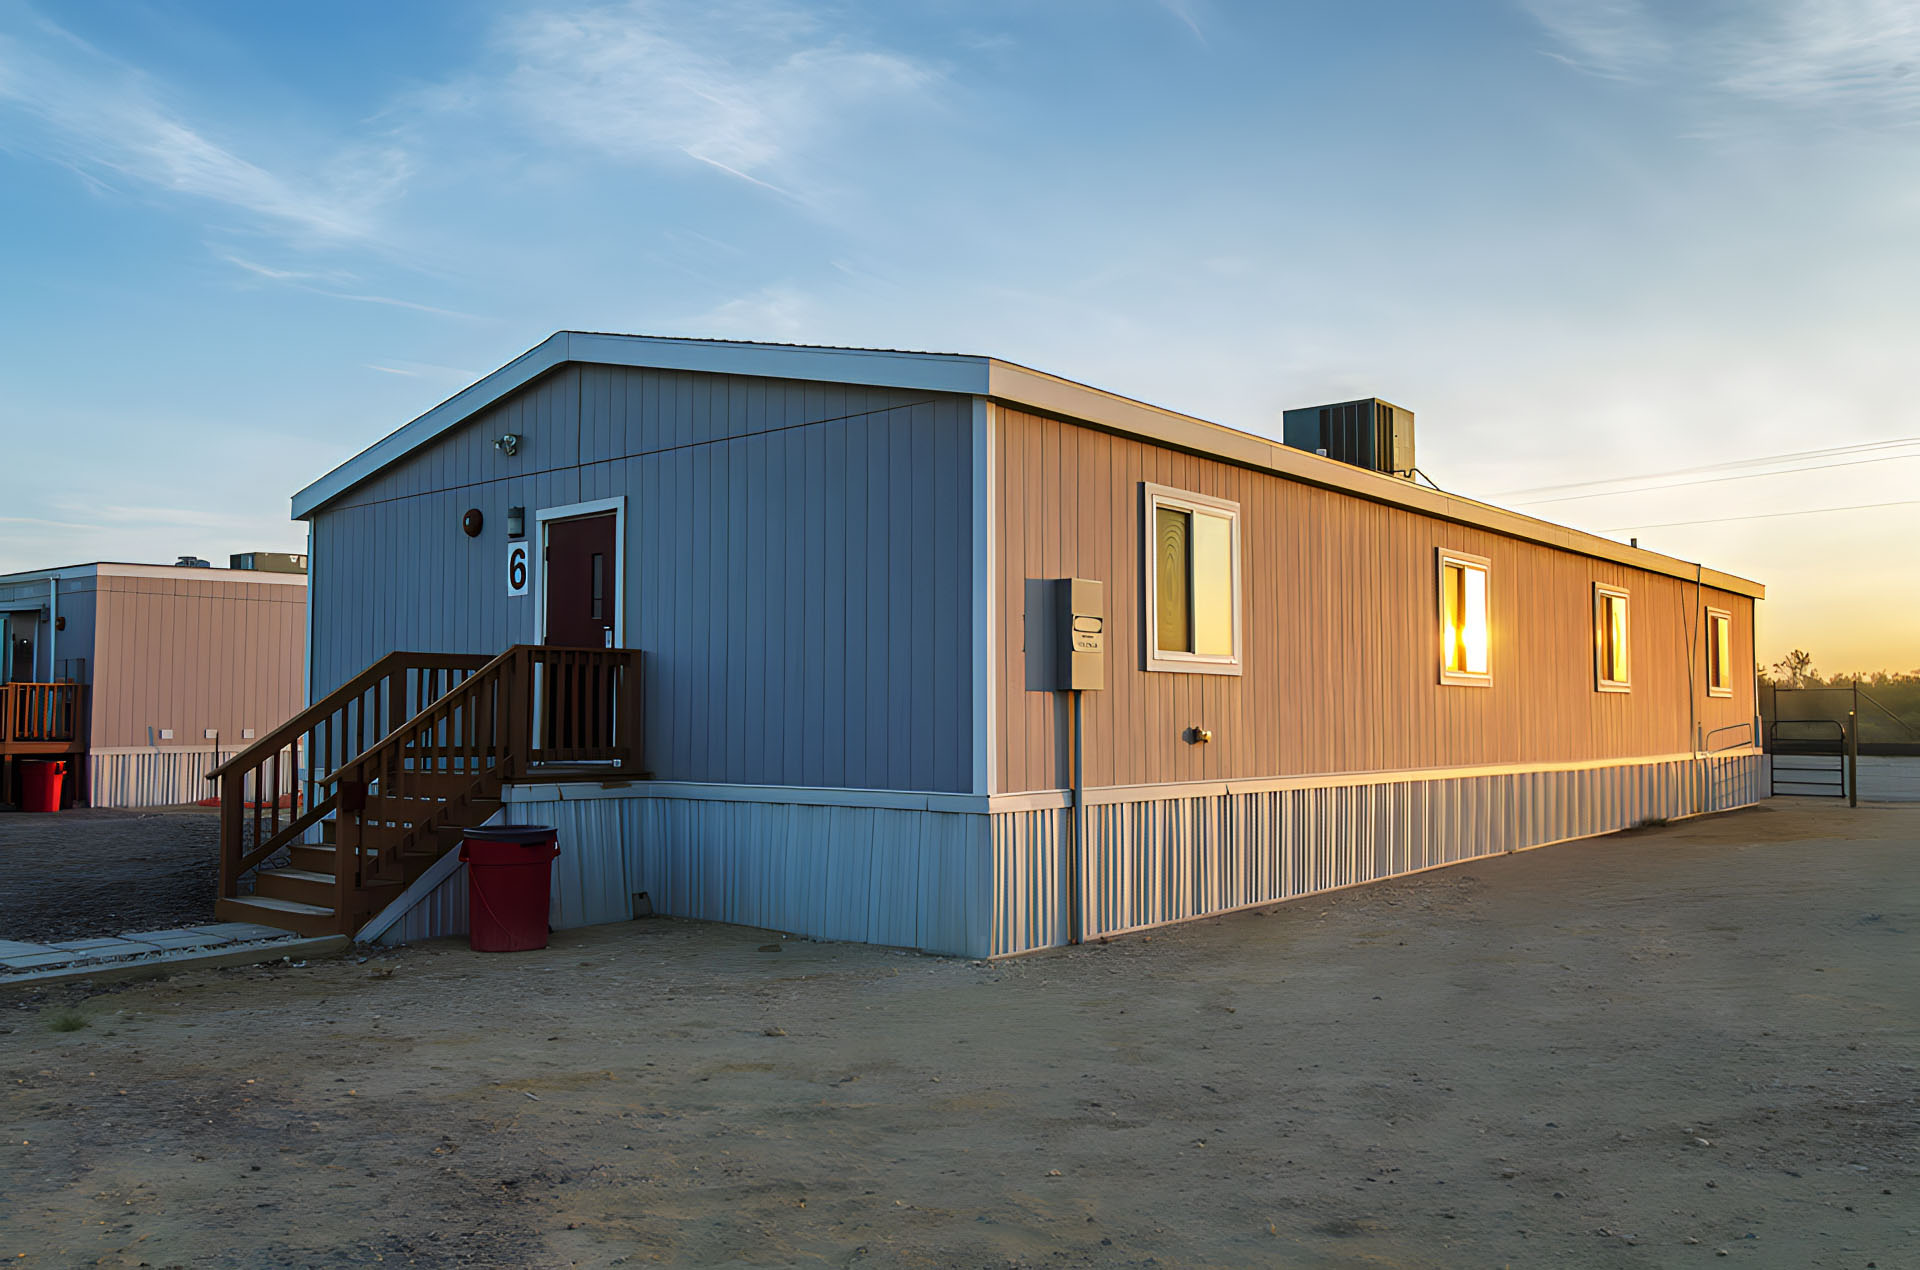 Side view of a portable modular structure in the Permian Basin, Texas.